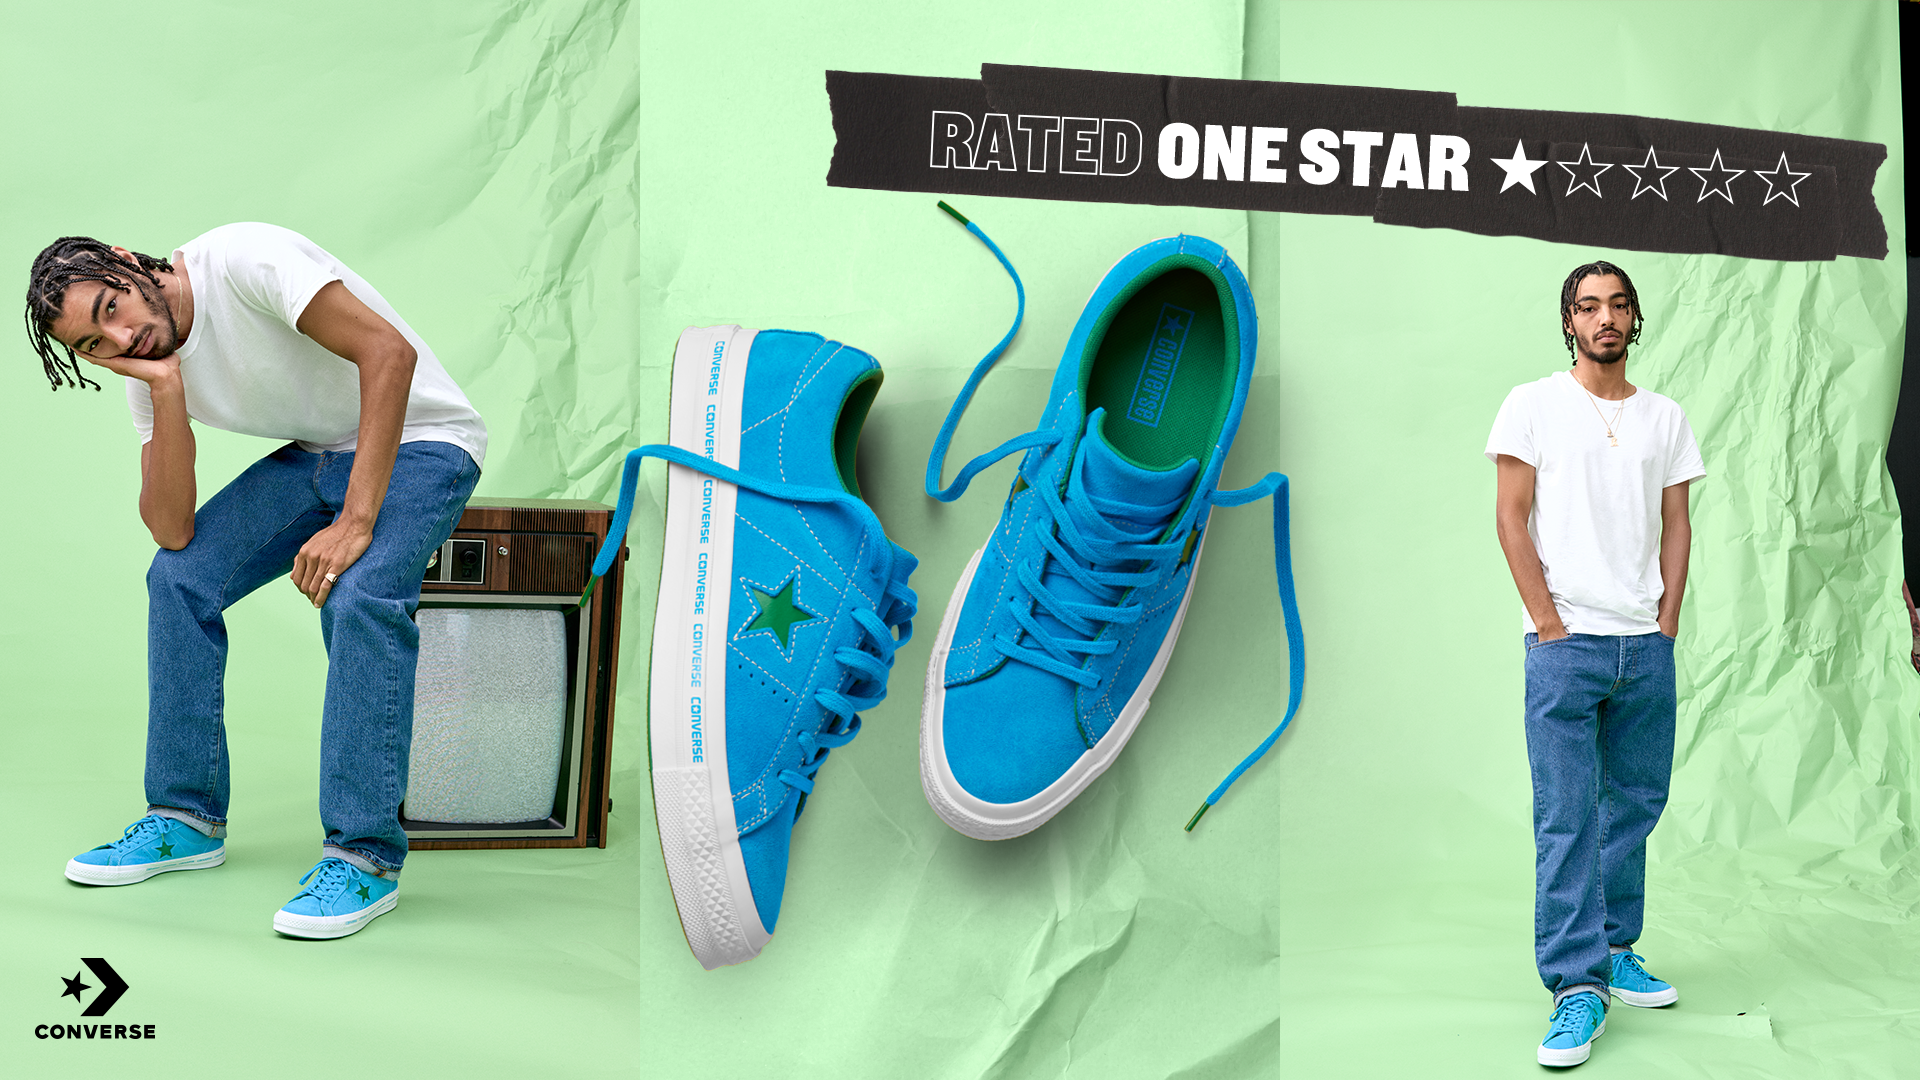 converse one star rated